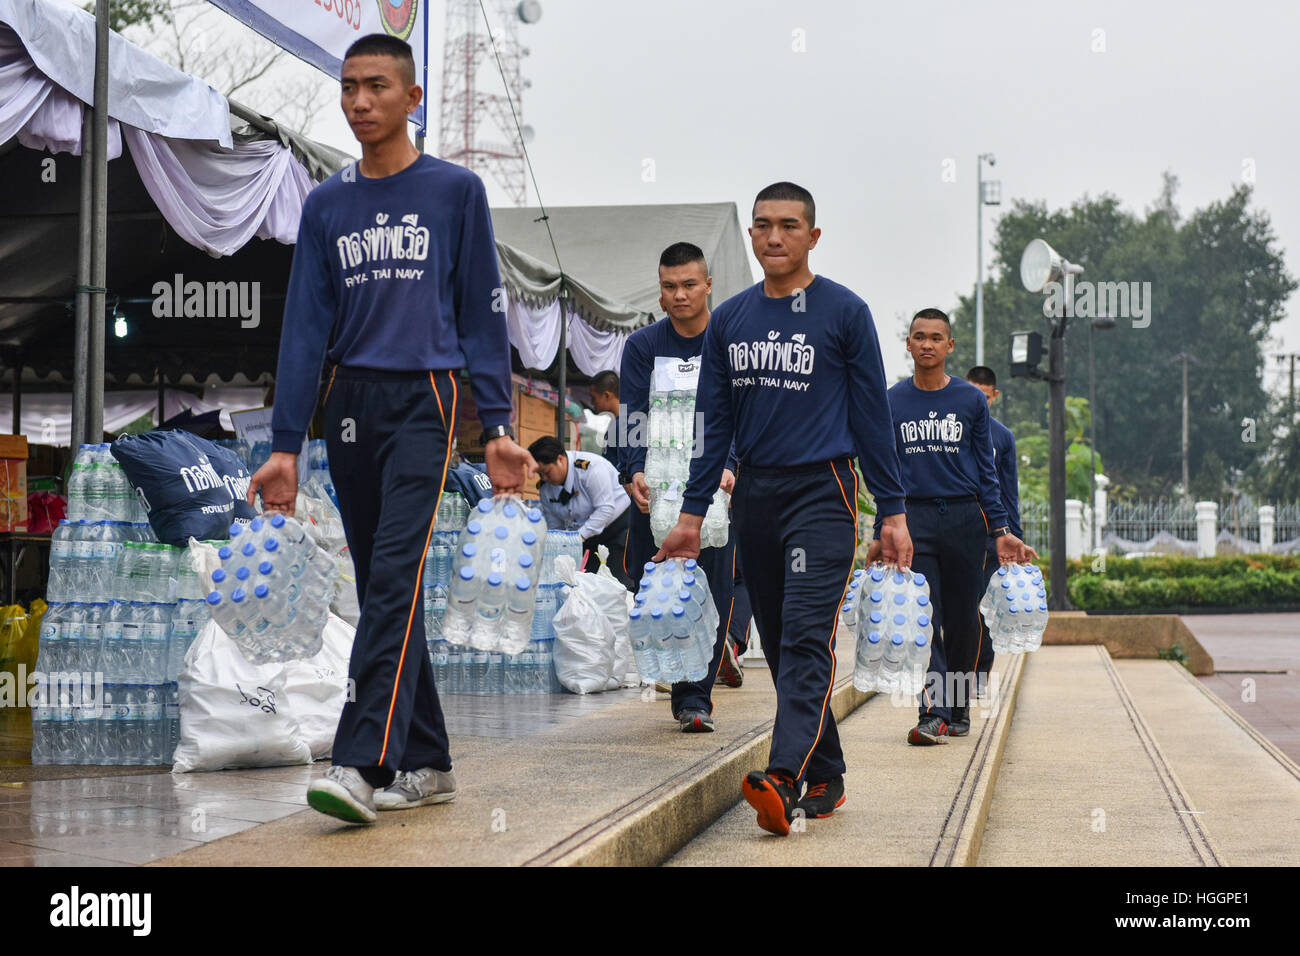 (170110) -- BANGKOK, Jan. 10, 2017 (Xinhua) -- Thai navy soldiers carry bottled drinking water donated by the public for the flooded southern provinces at a donation center set inside a naval base in Bangkok, Thailand, Jan. 10, 2017. The Thai government and military have set up donation centers which accept either cash or disaster relief materials from citizens in response to the severe flooding in the country's southern region. Persistent heavy rainfall has left Thailand's 12 southern provinces flooded, killing at least 21 people while affecting 330,000 households till Monday. (Xinhua/Li Mang Stock Photo